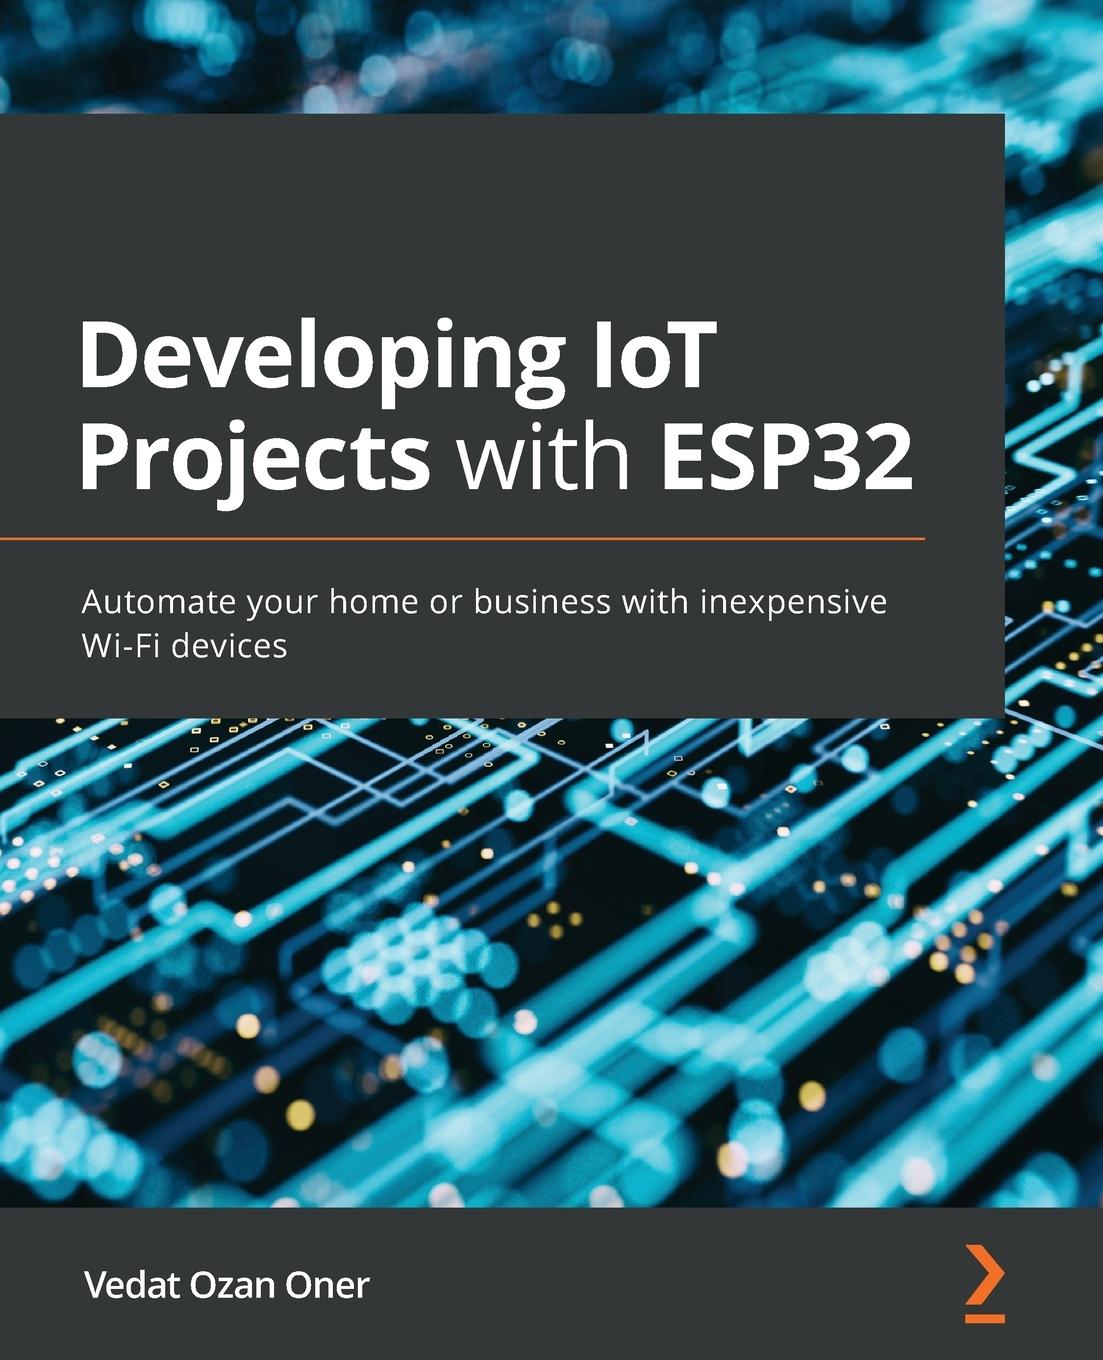 Book Developing IoT Projects with ESP32 Vedat Ozan Oner